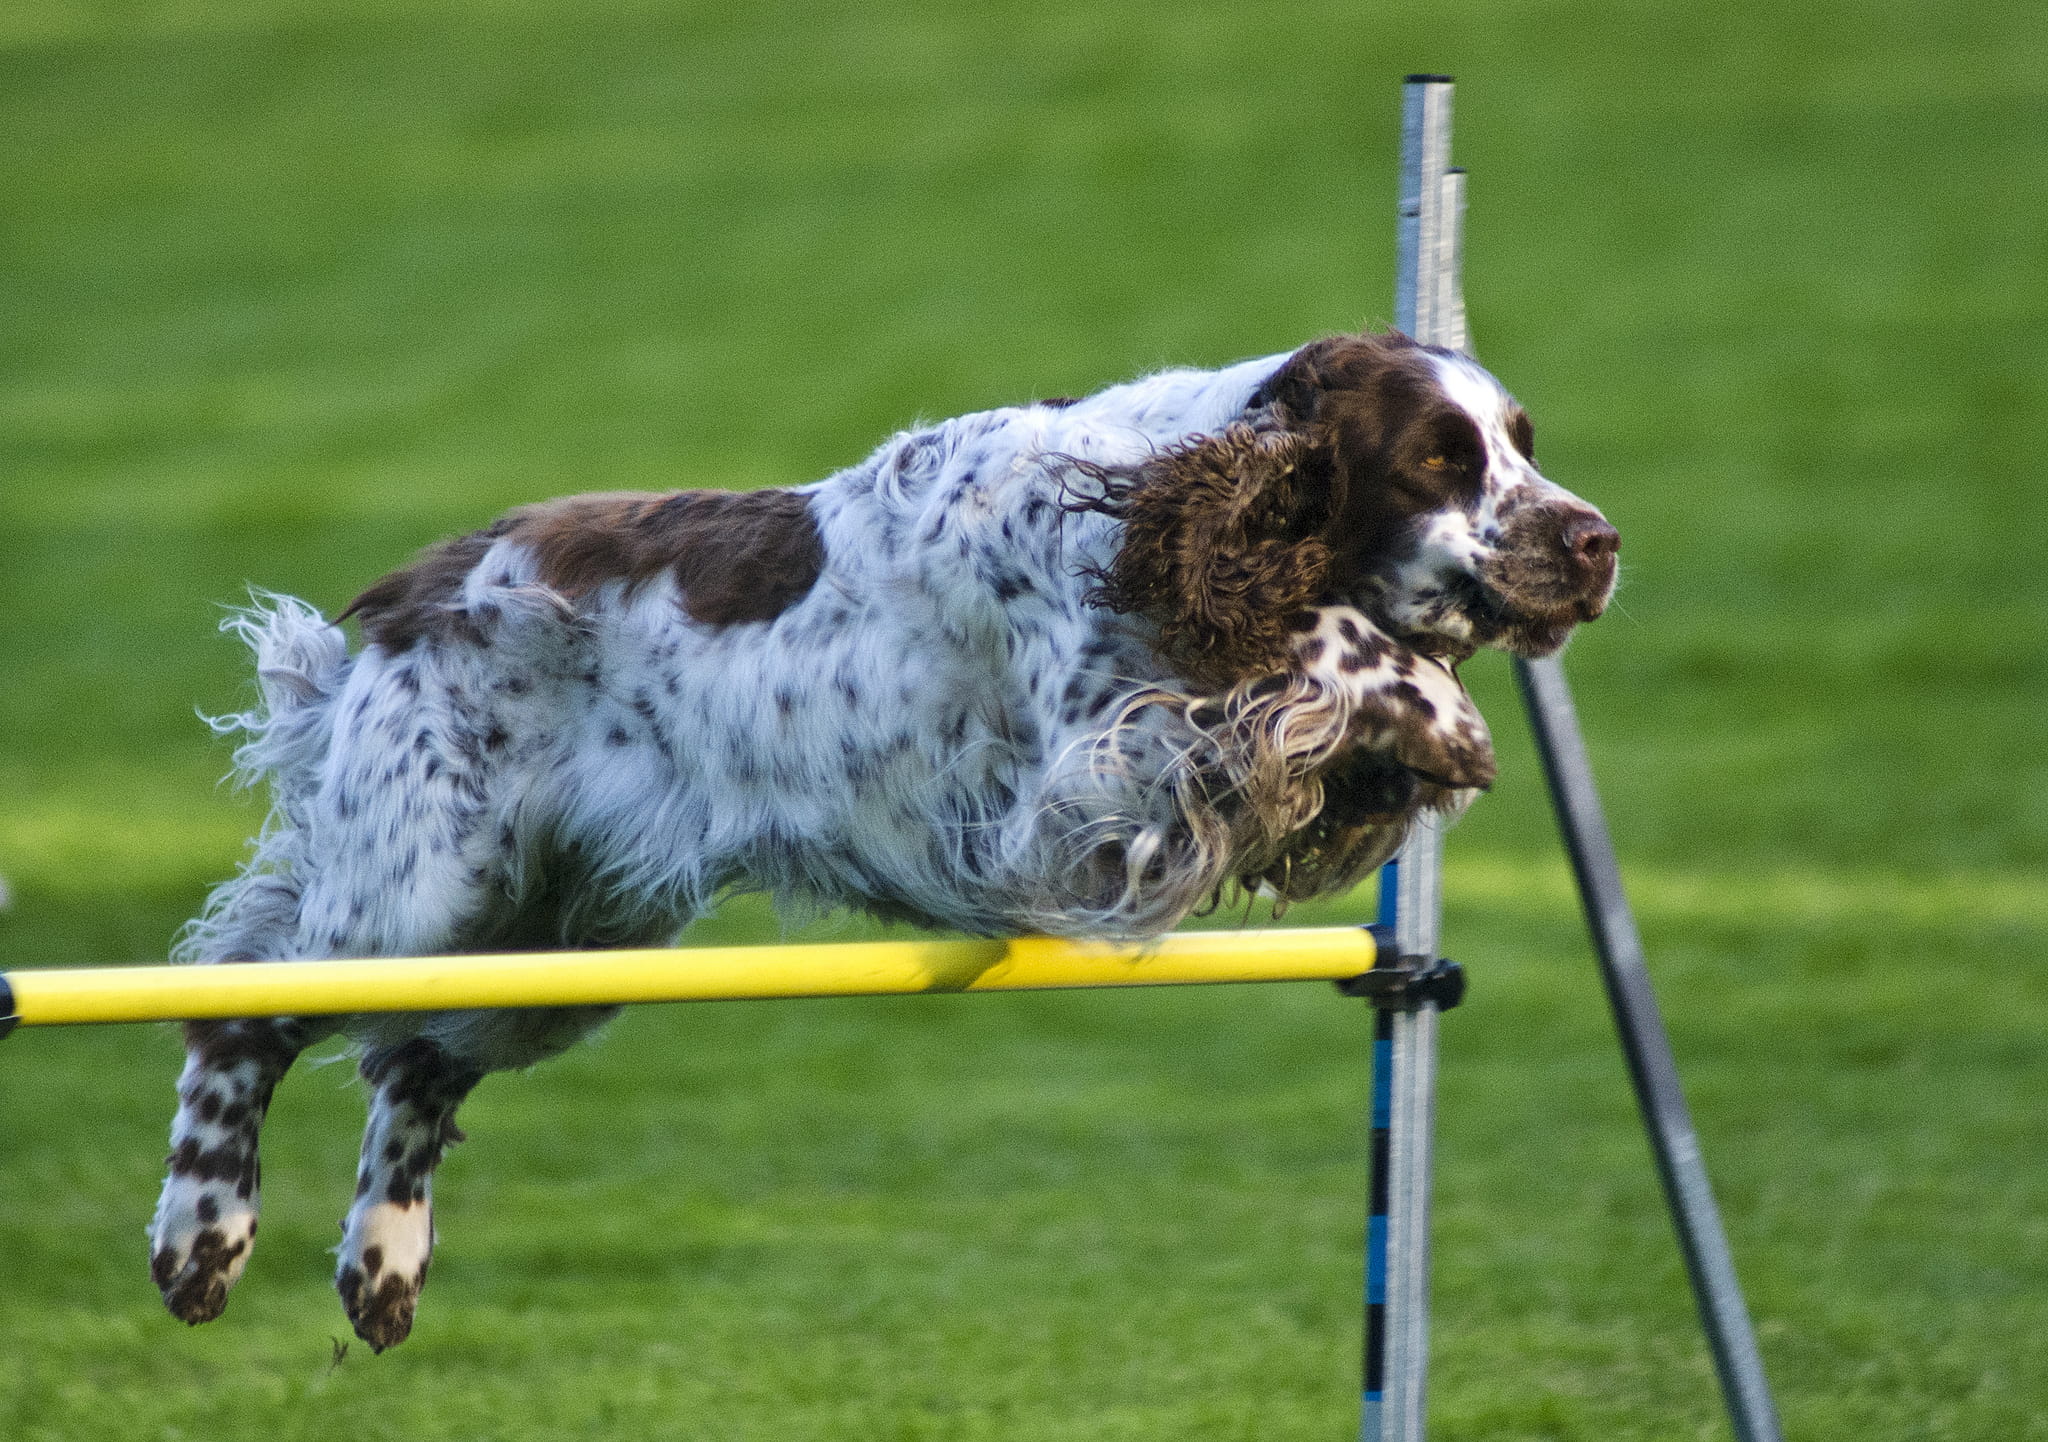 Agility Training for Dogs: Benefits and Starting Tips